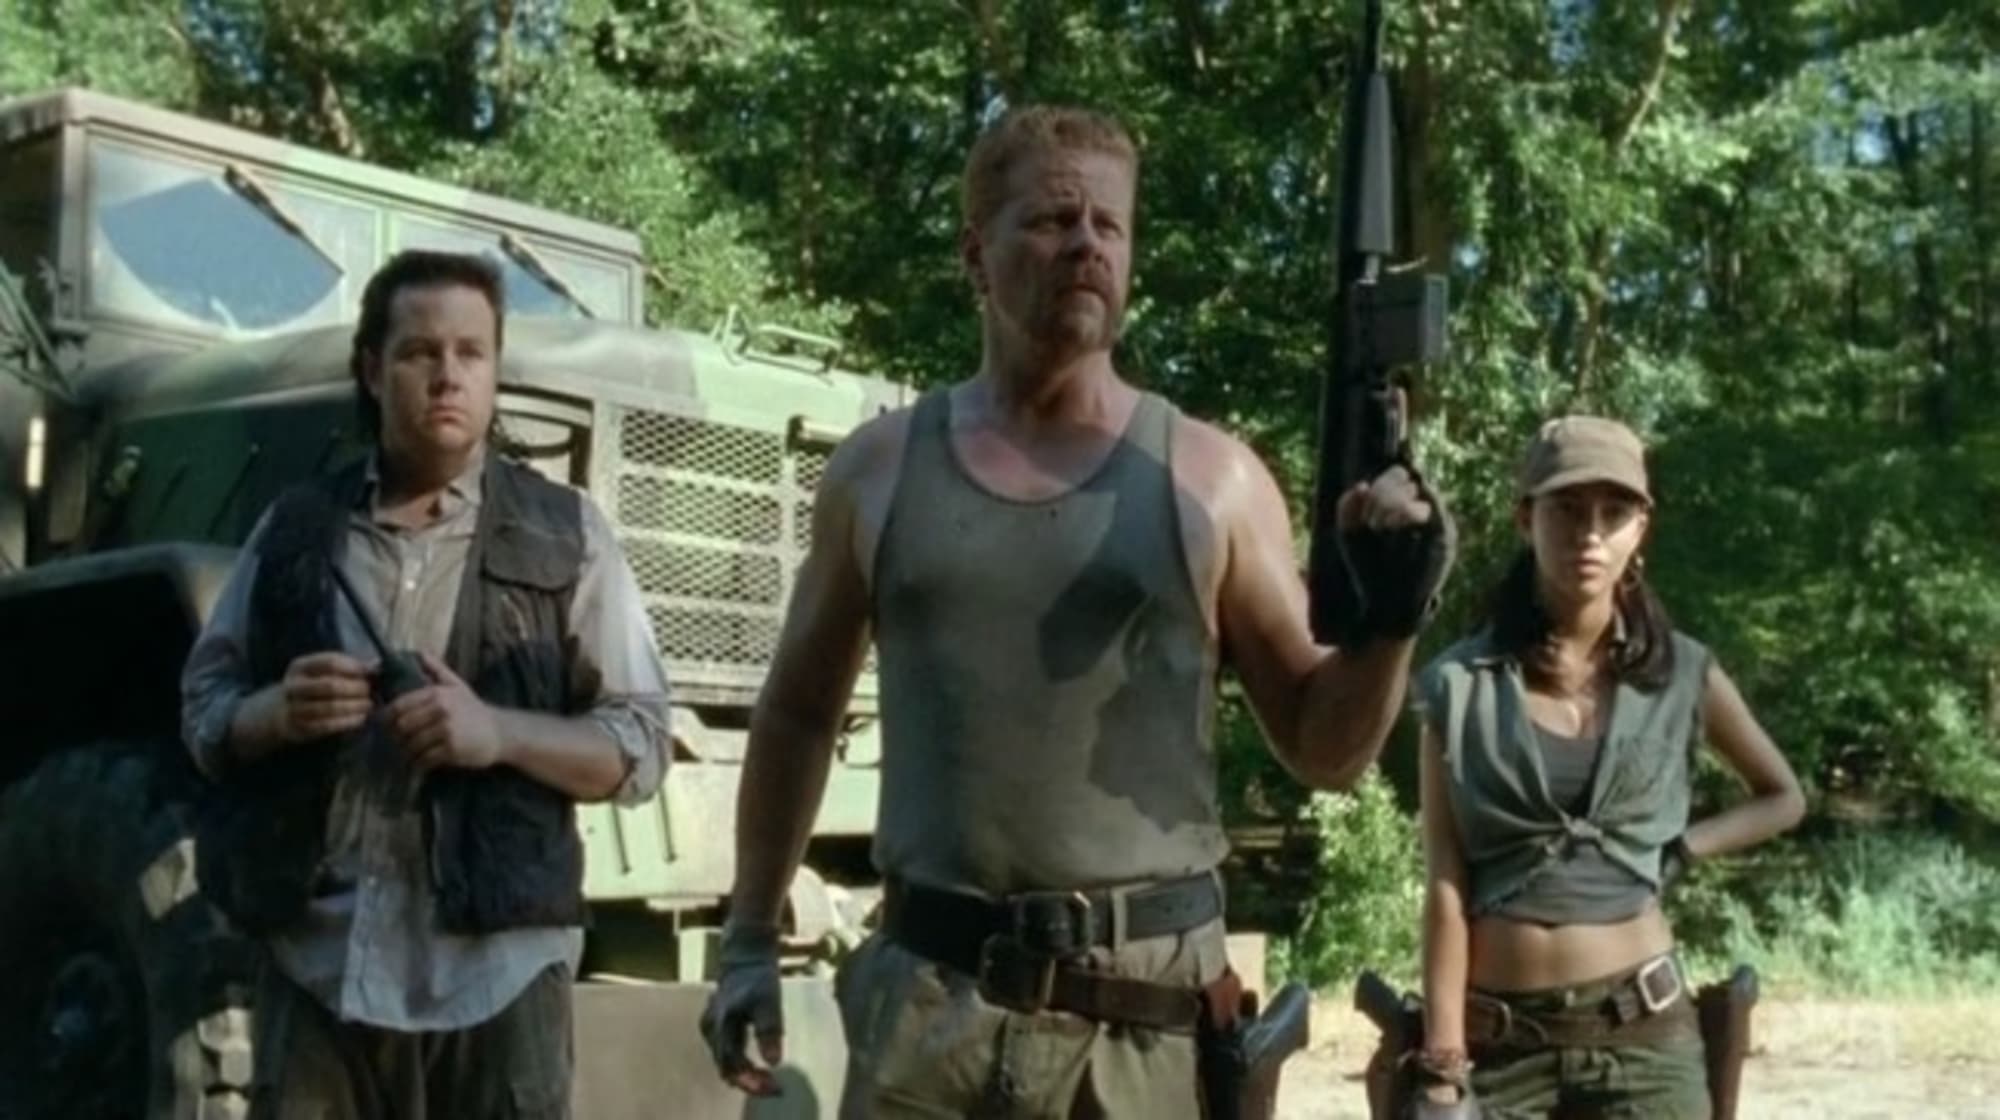 Great Character Introductions on The Walking Dead: Abraham's Army